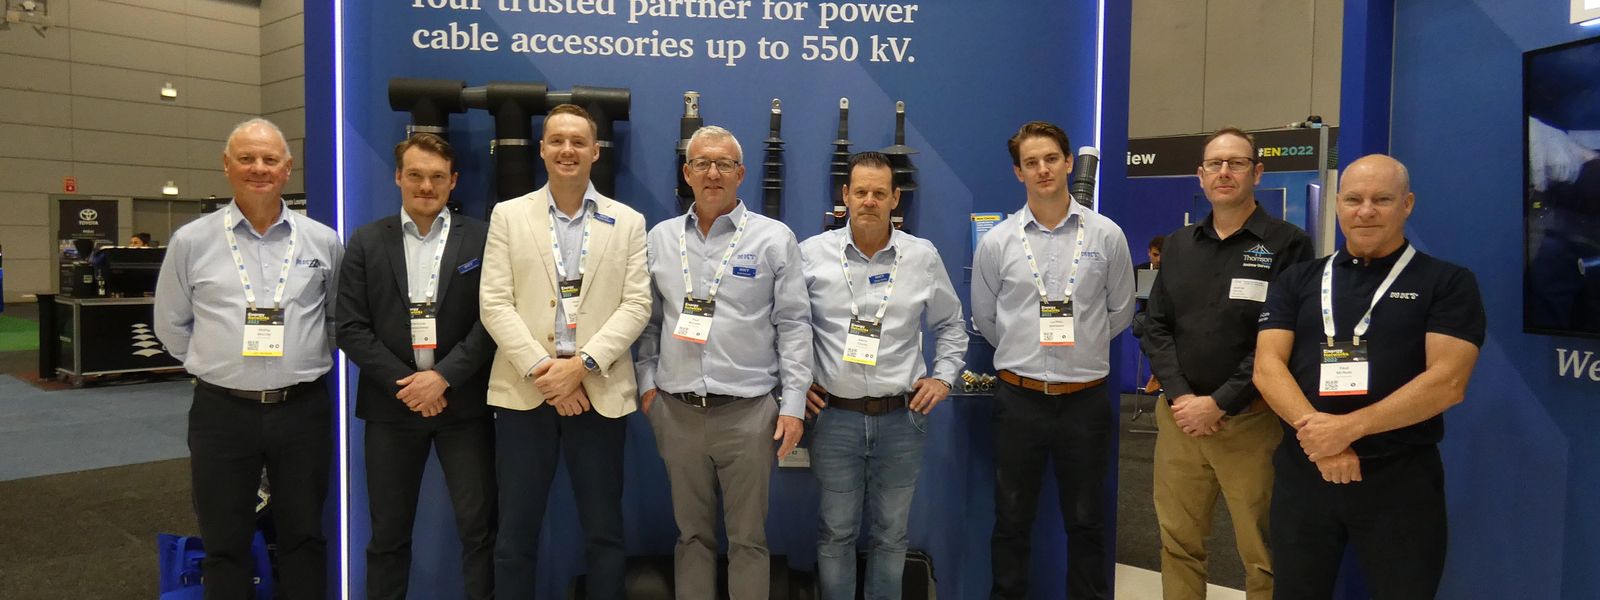 employees trade fair trusted partner power cable accessories